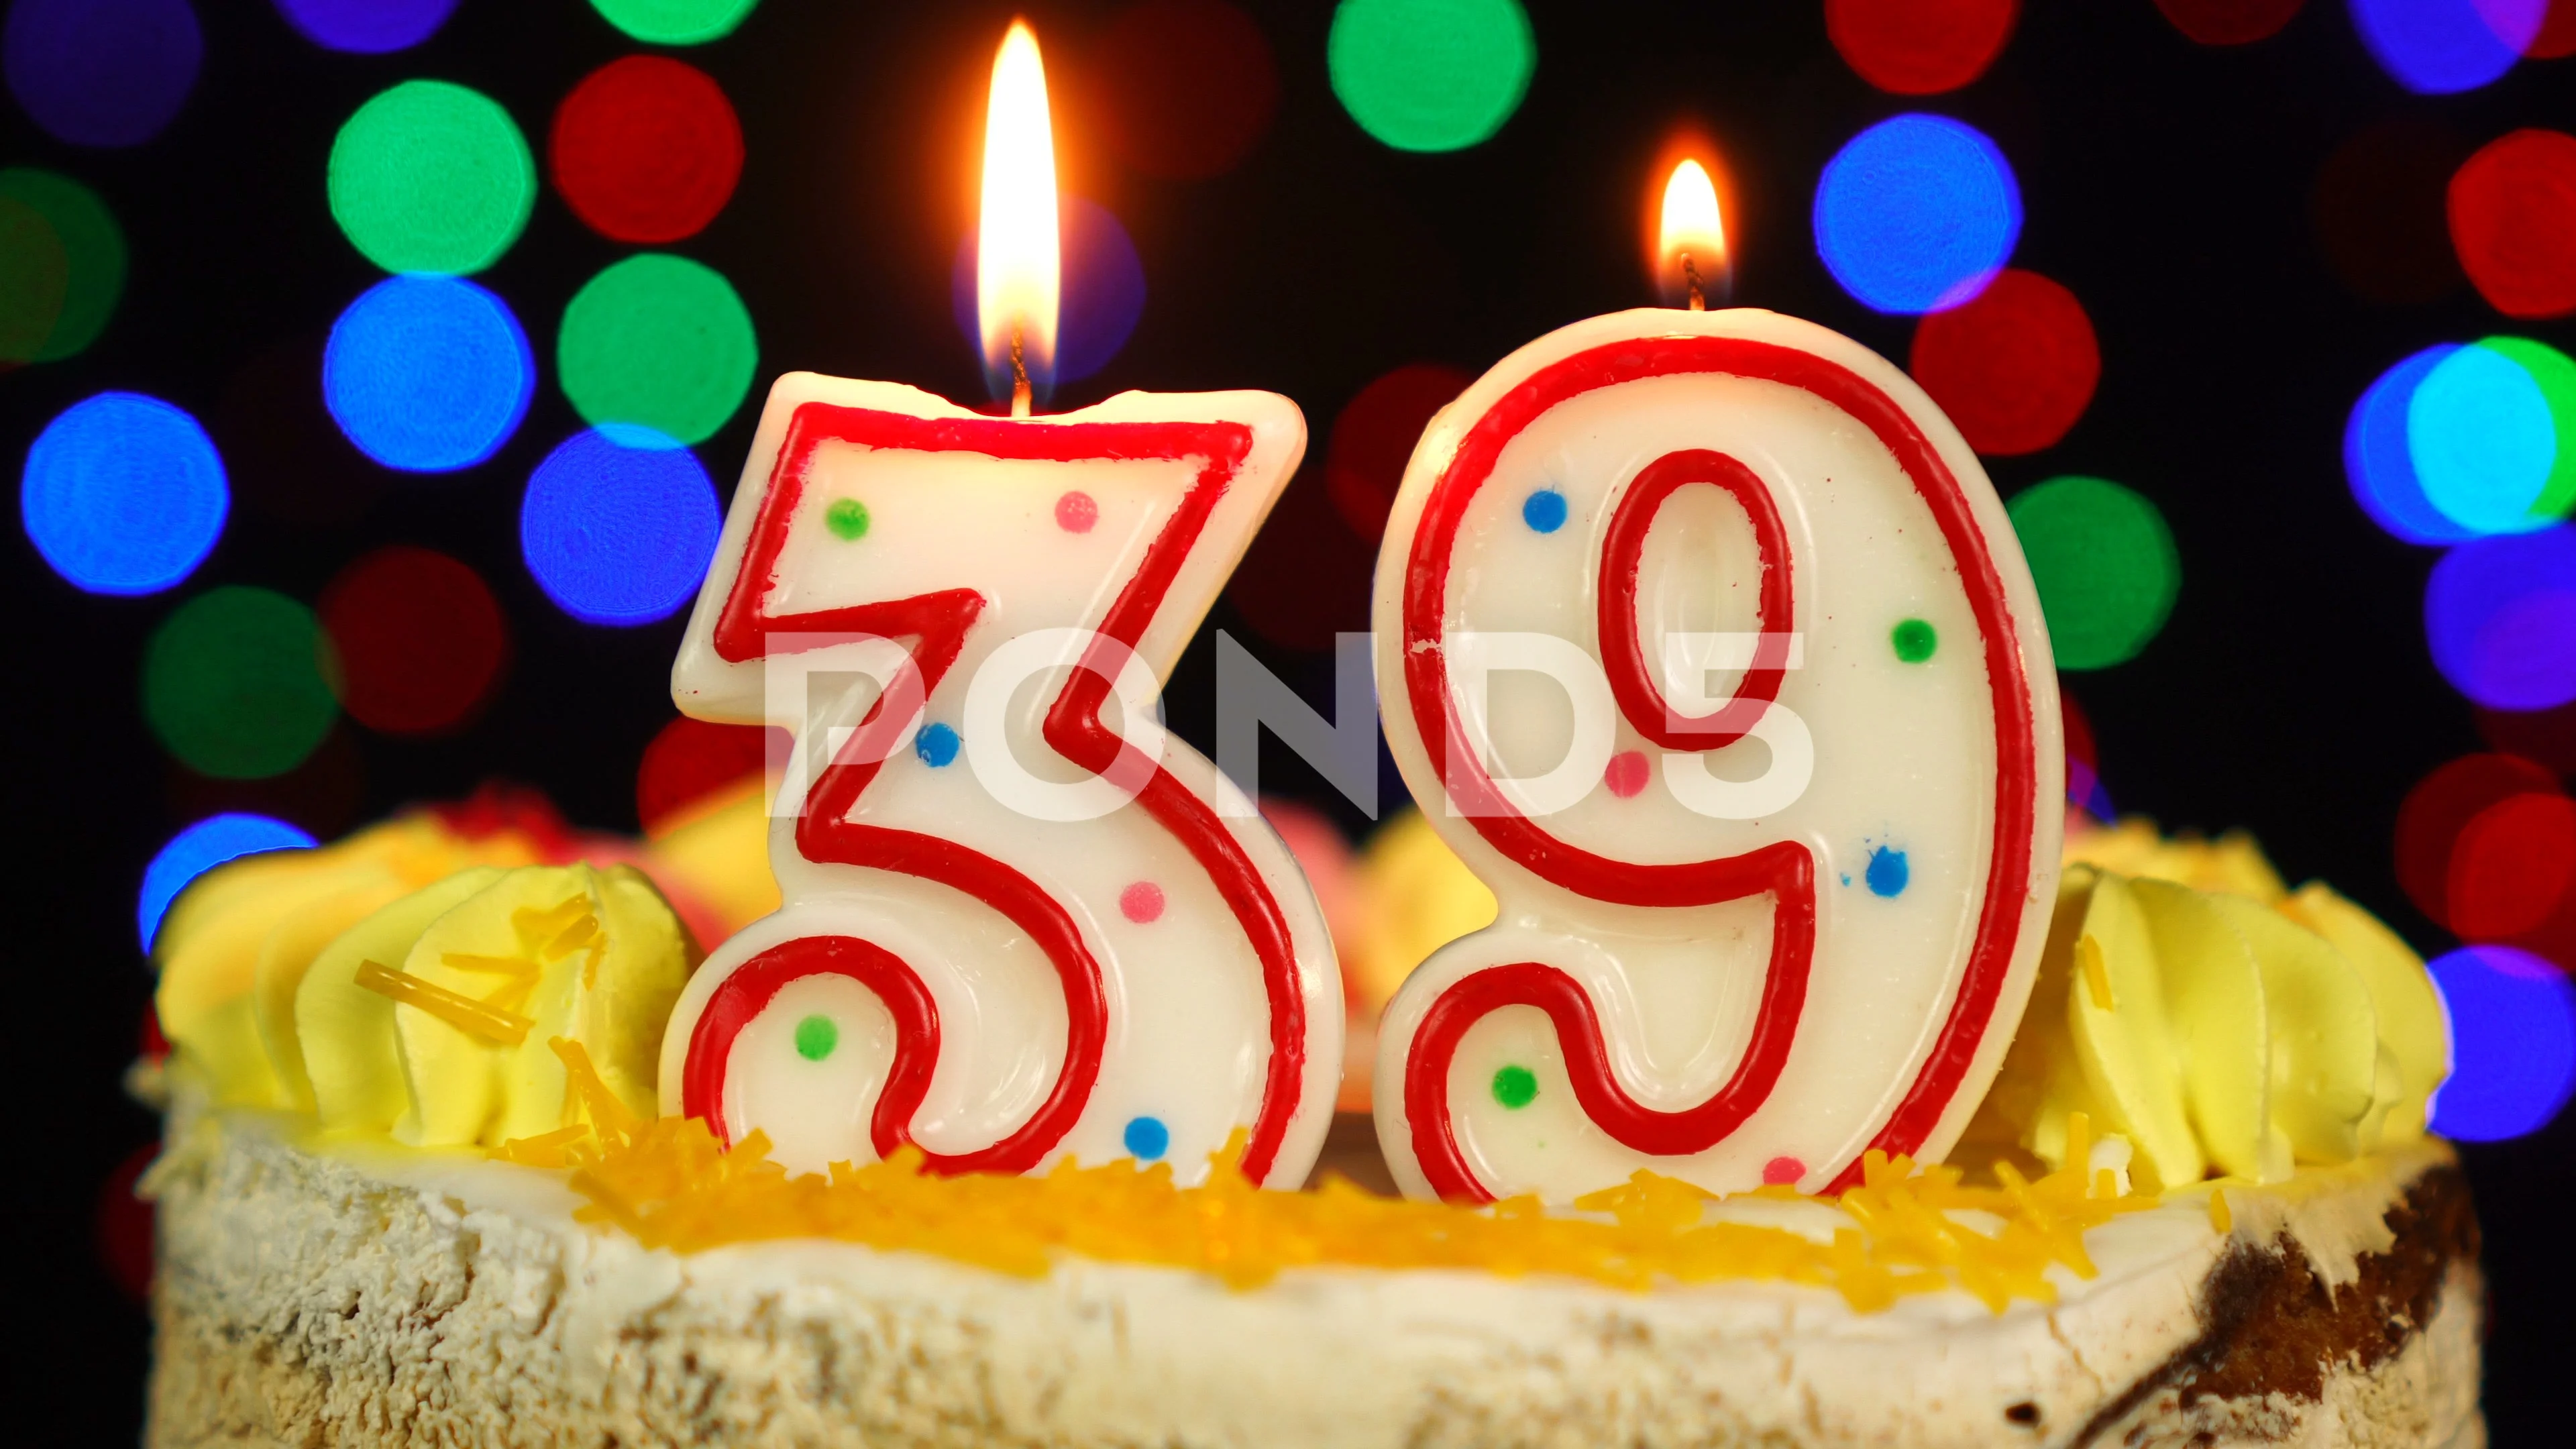 337 39 Birthday Cake Images, Stock Photos, 3D objects, & Vectors |  Shutterstock